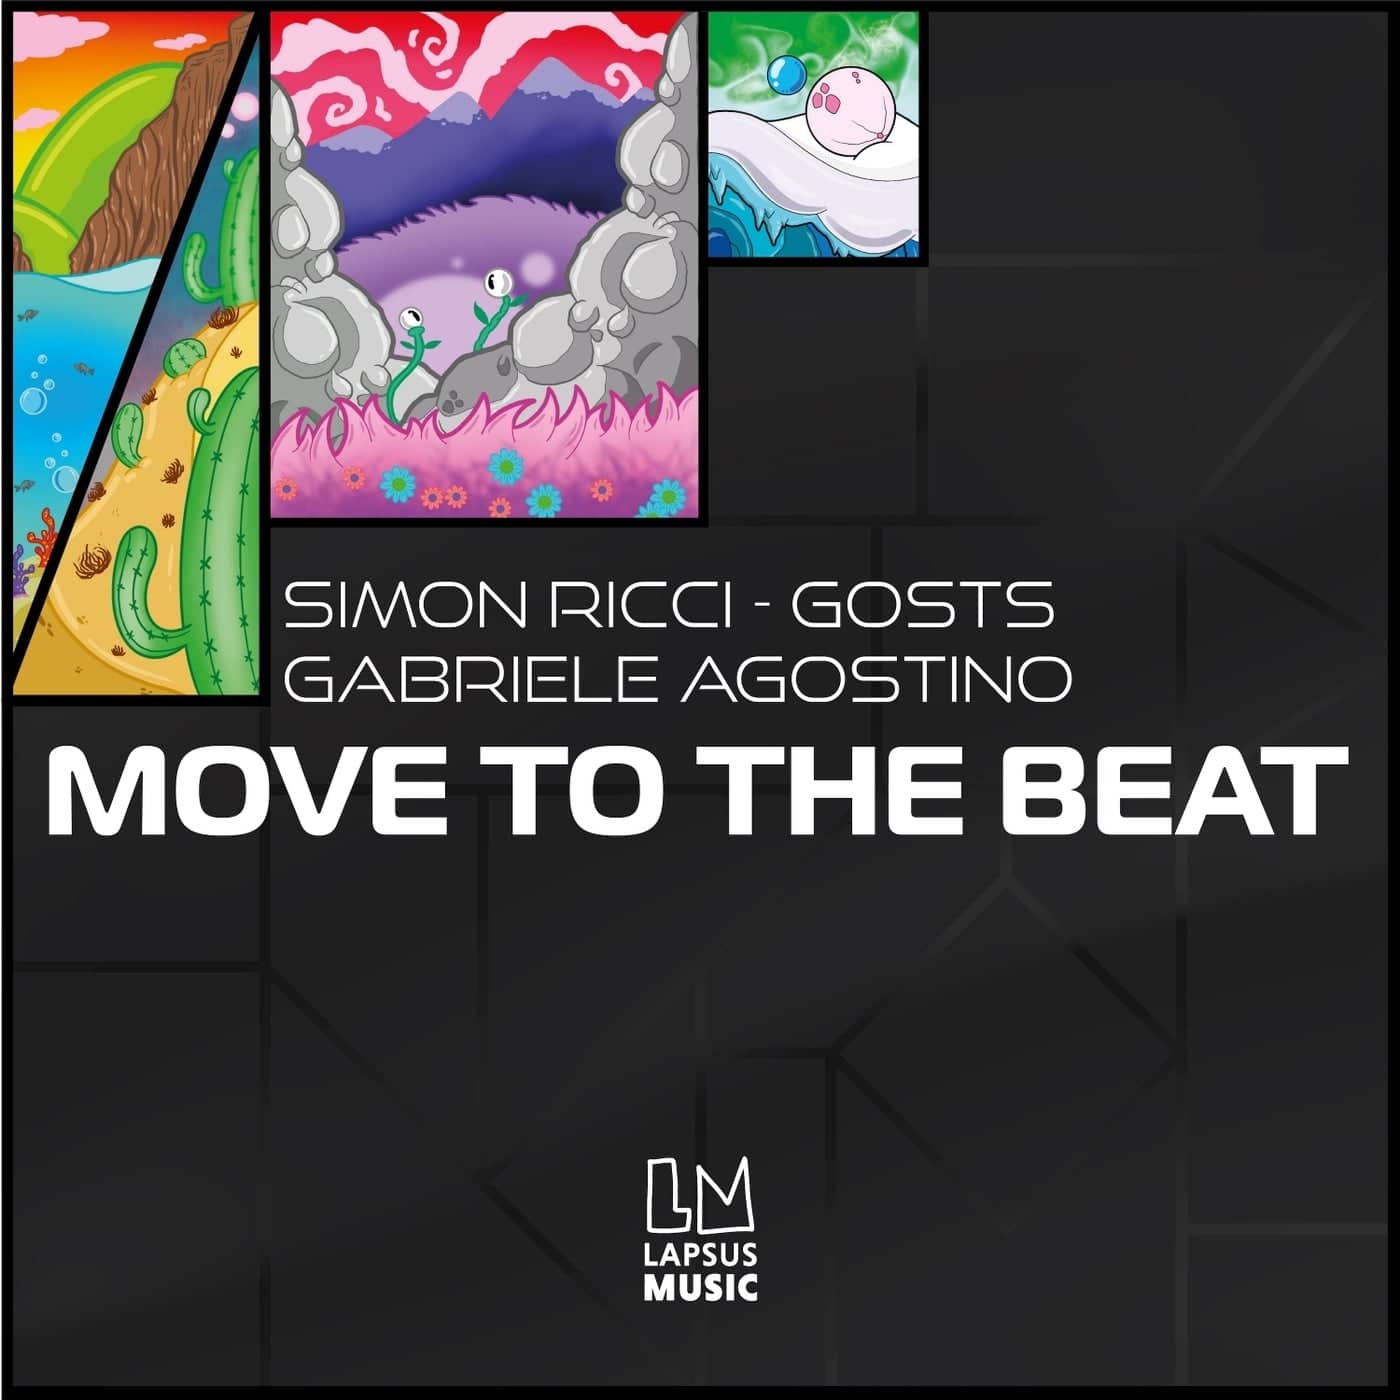 image cover: Simon Ricci, Gosts, Gabriele Agostino - Move to the Beat (Extended Mix) / LPS320D